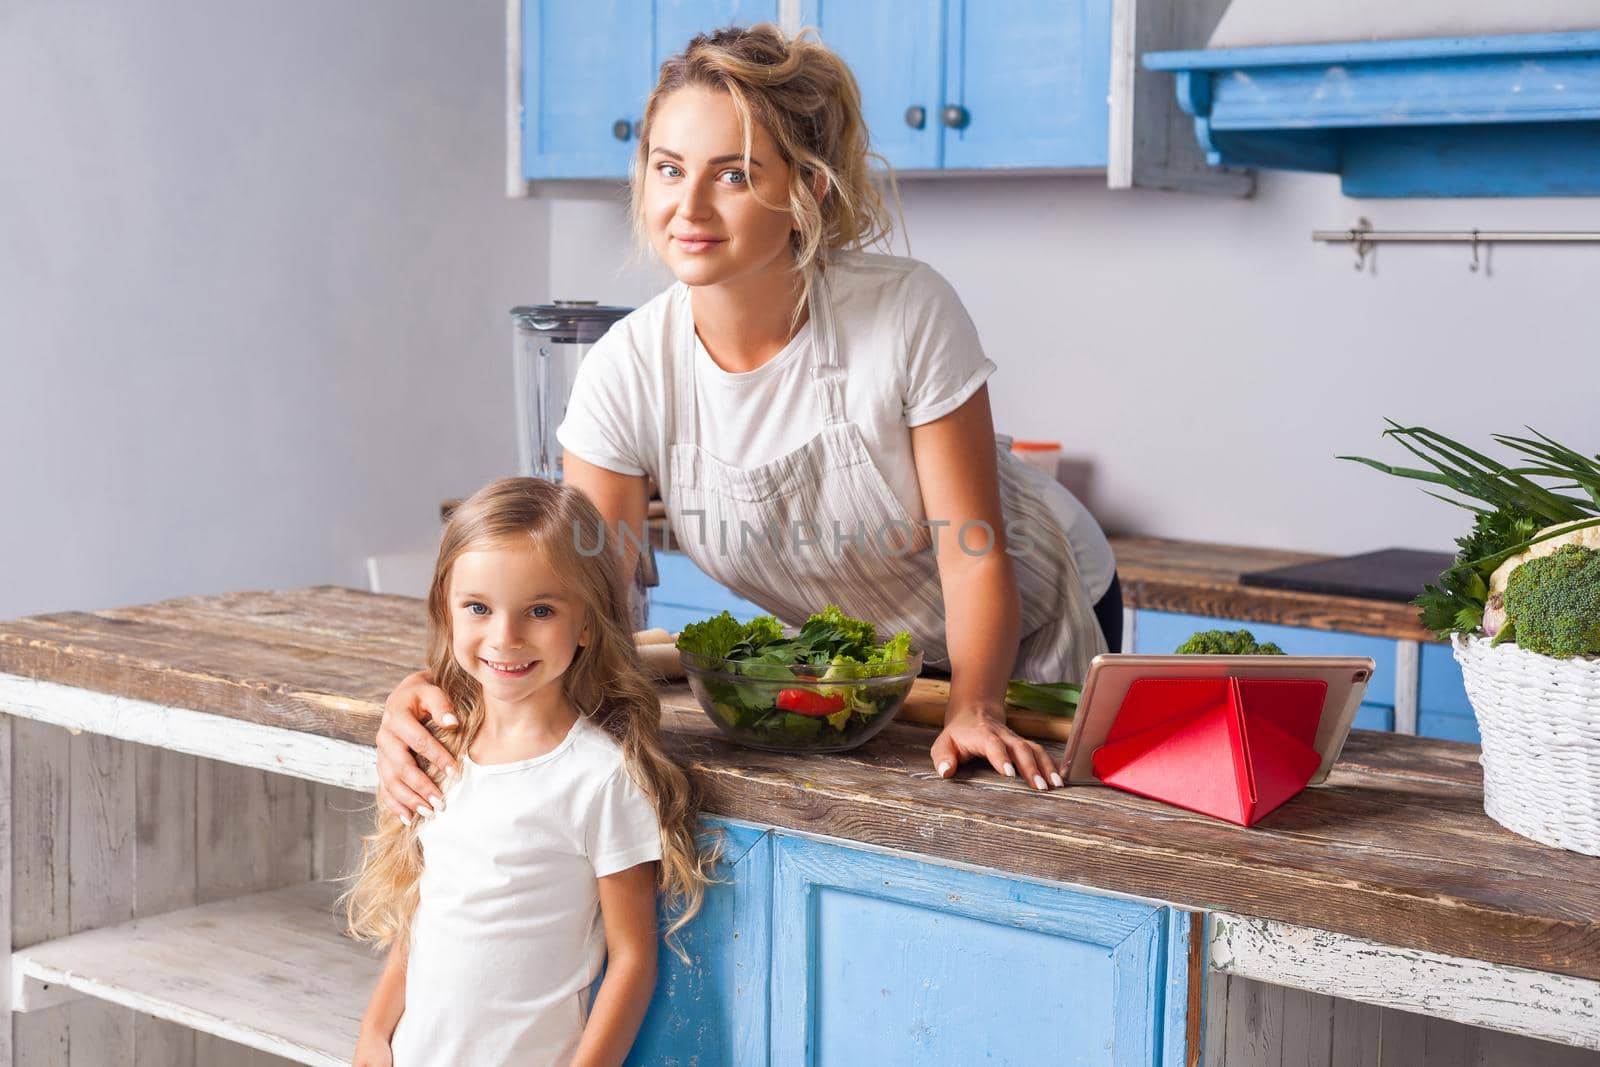 Cute woman and her daughter smiling at camera standing in modern kitchen, mother keeping hand on girl's shoulder, cooked salad with fresh green vegetables on table, vegetarian food, healthy nutrition